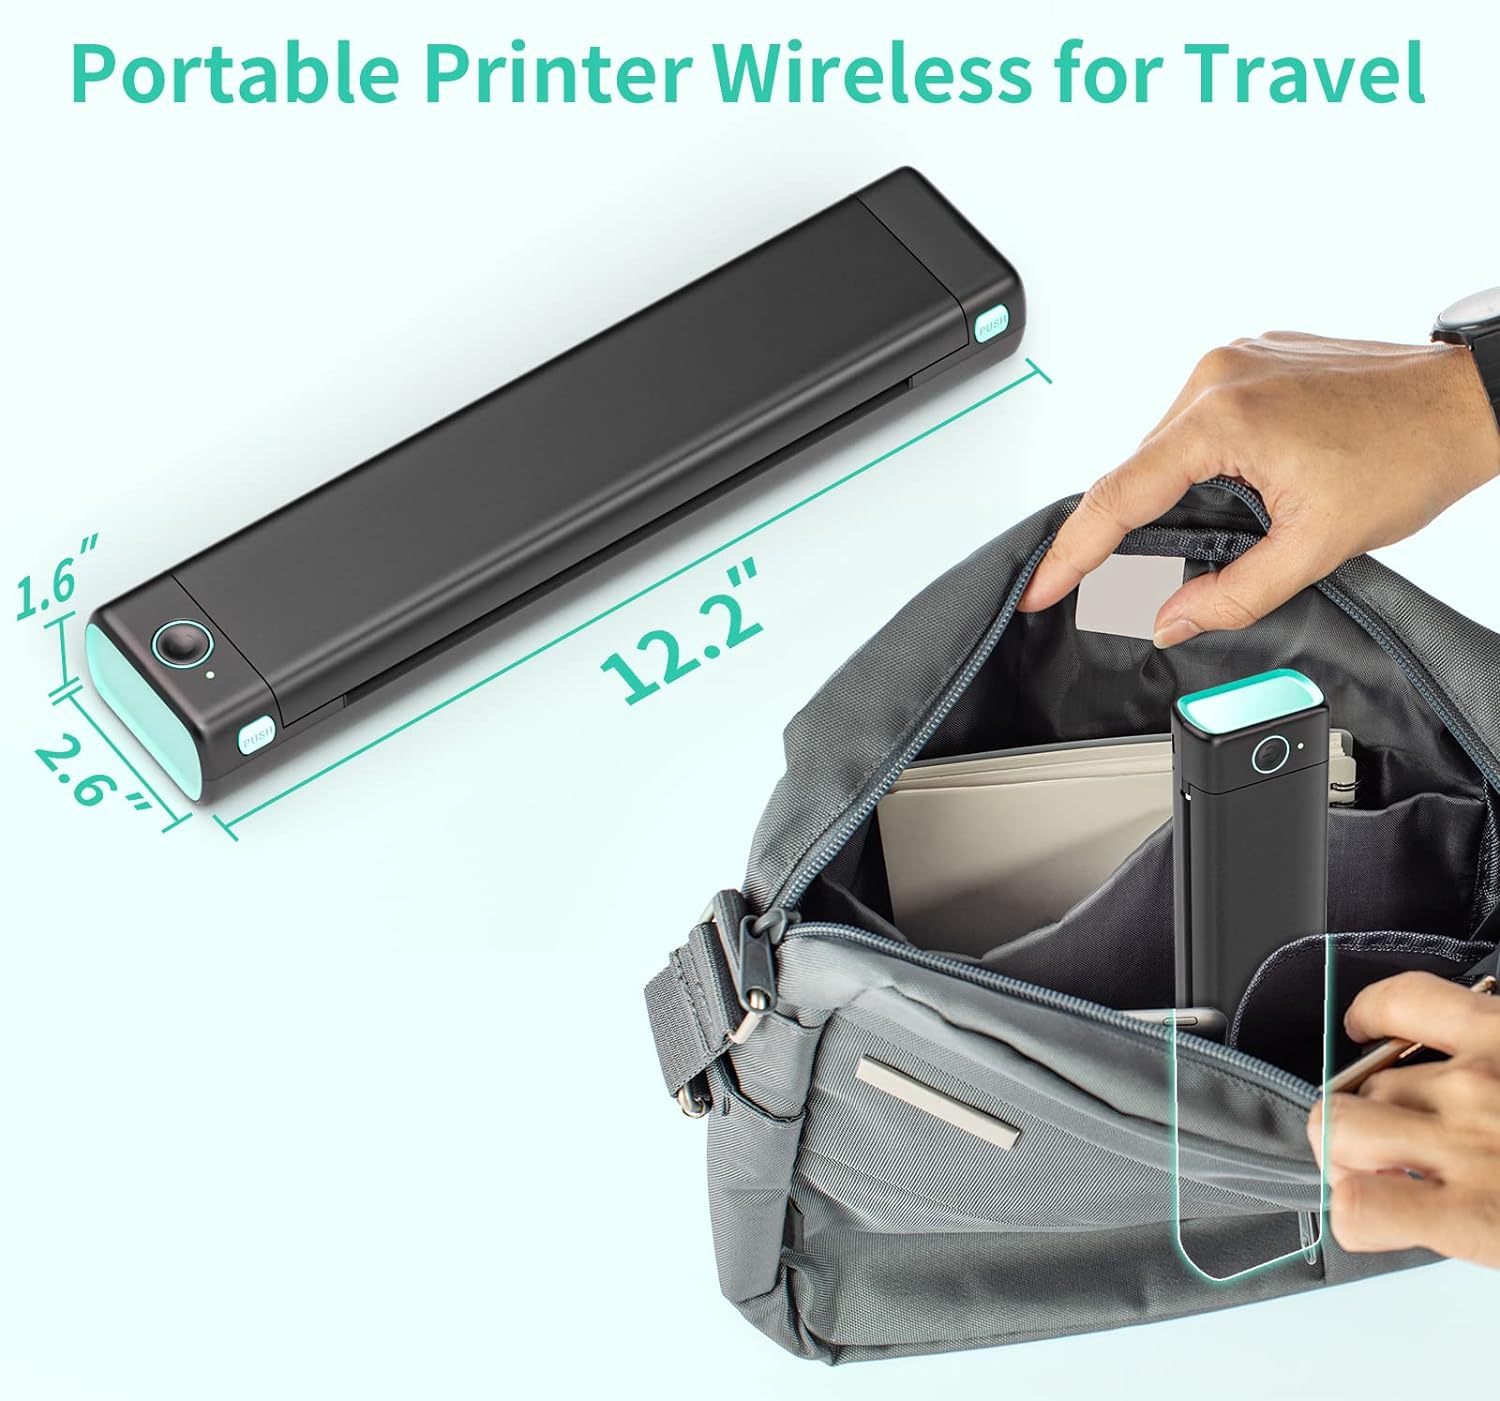 Dissection of PhoPRT M08F Portable Printer